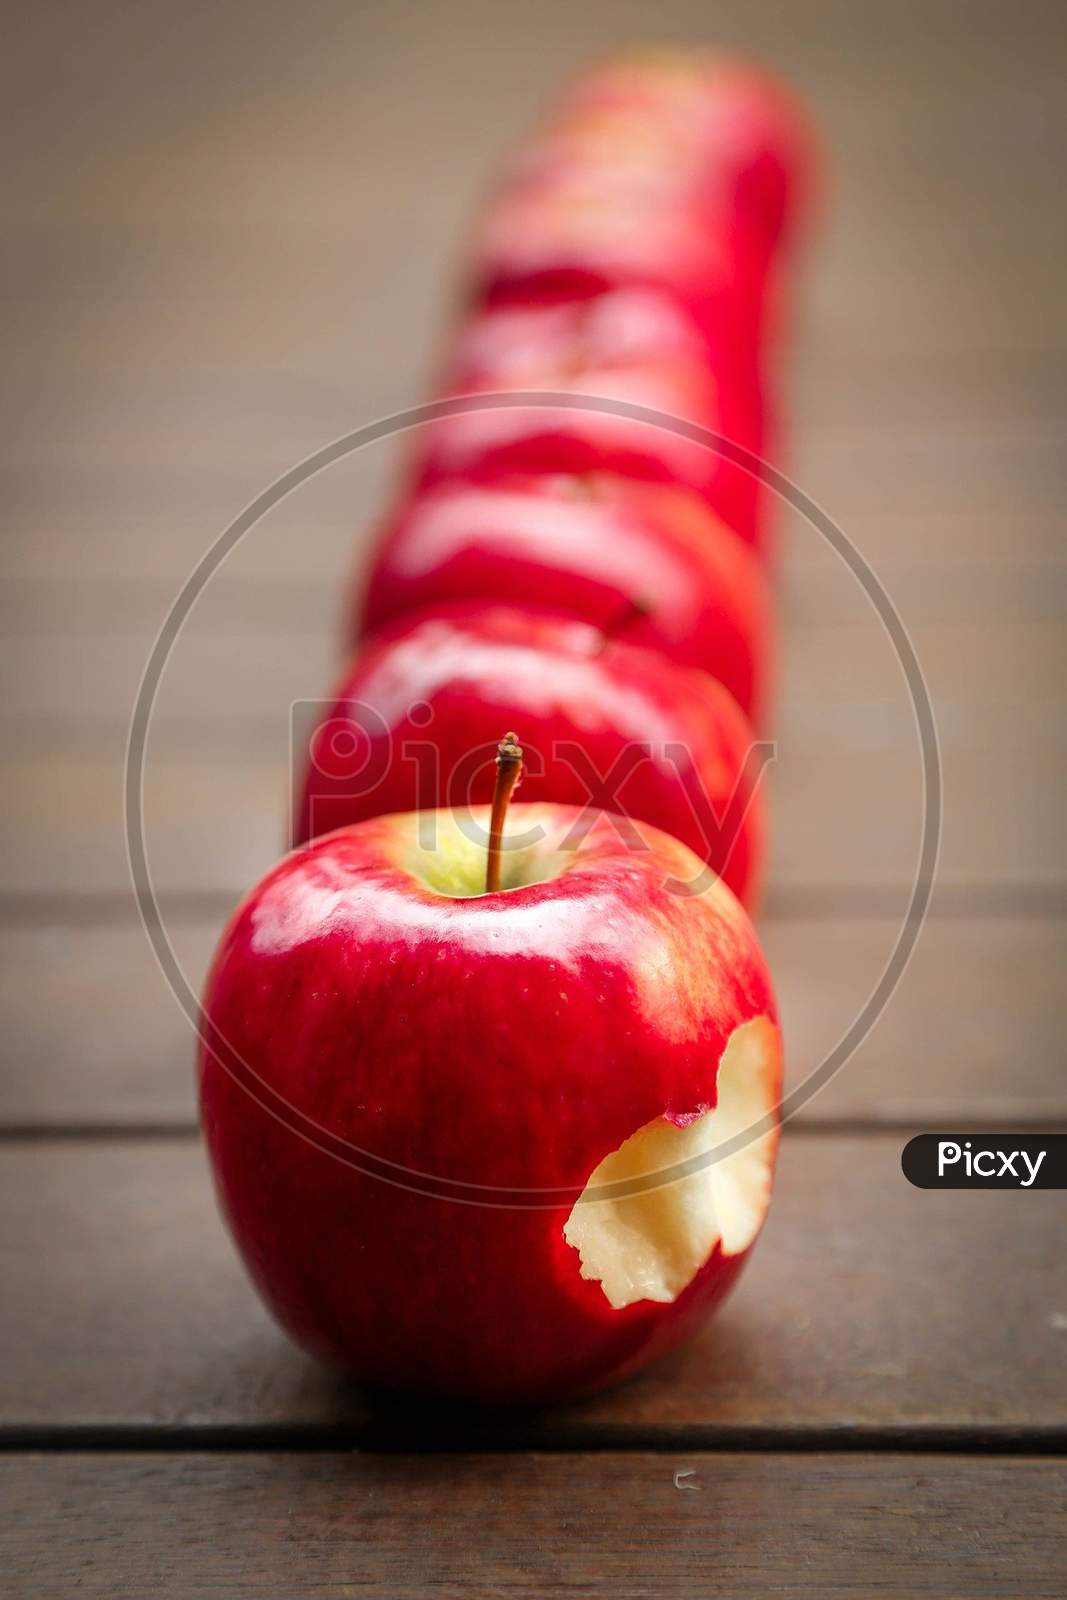 Apple fruits red Ripe